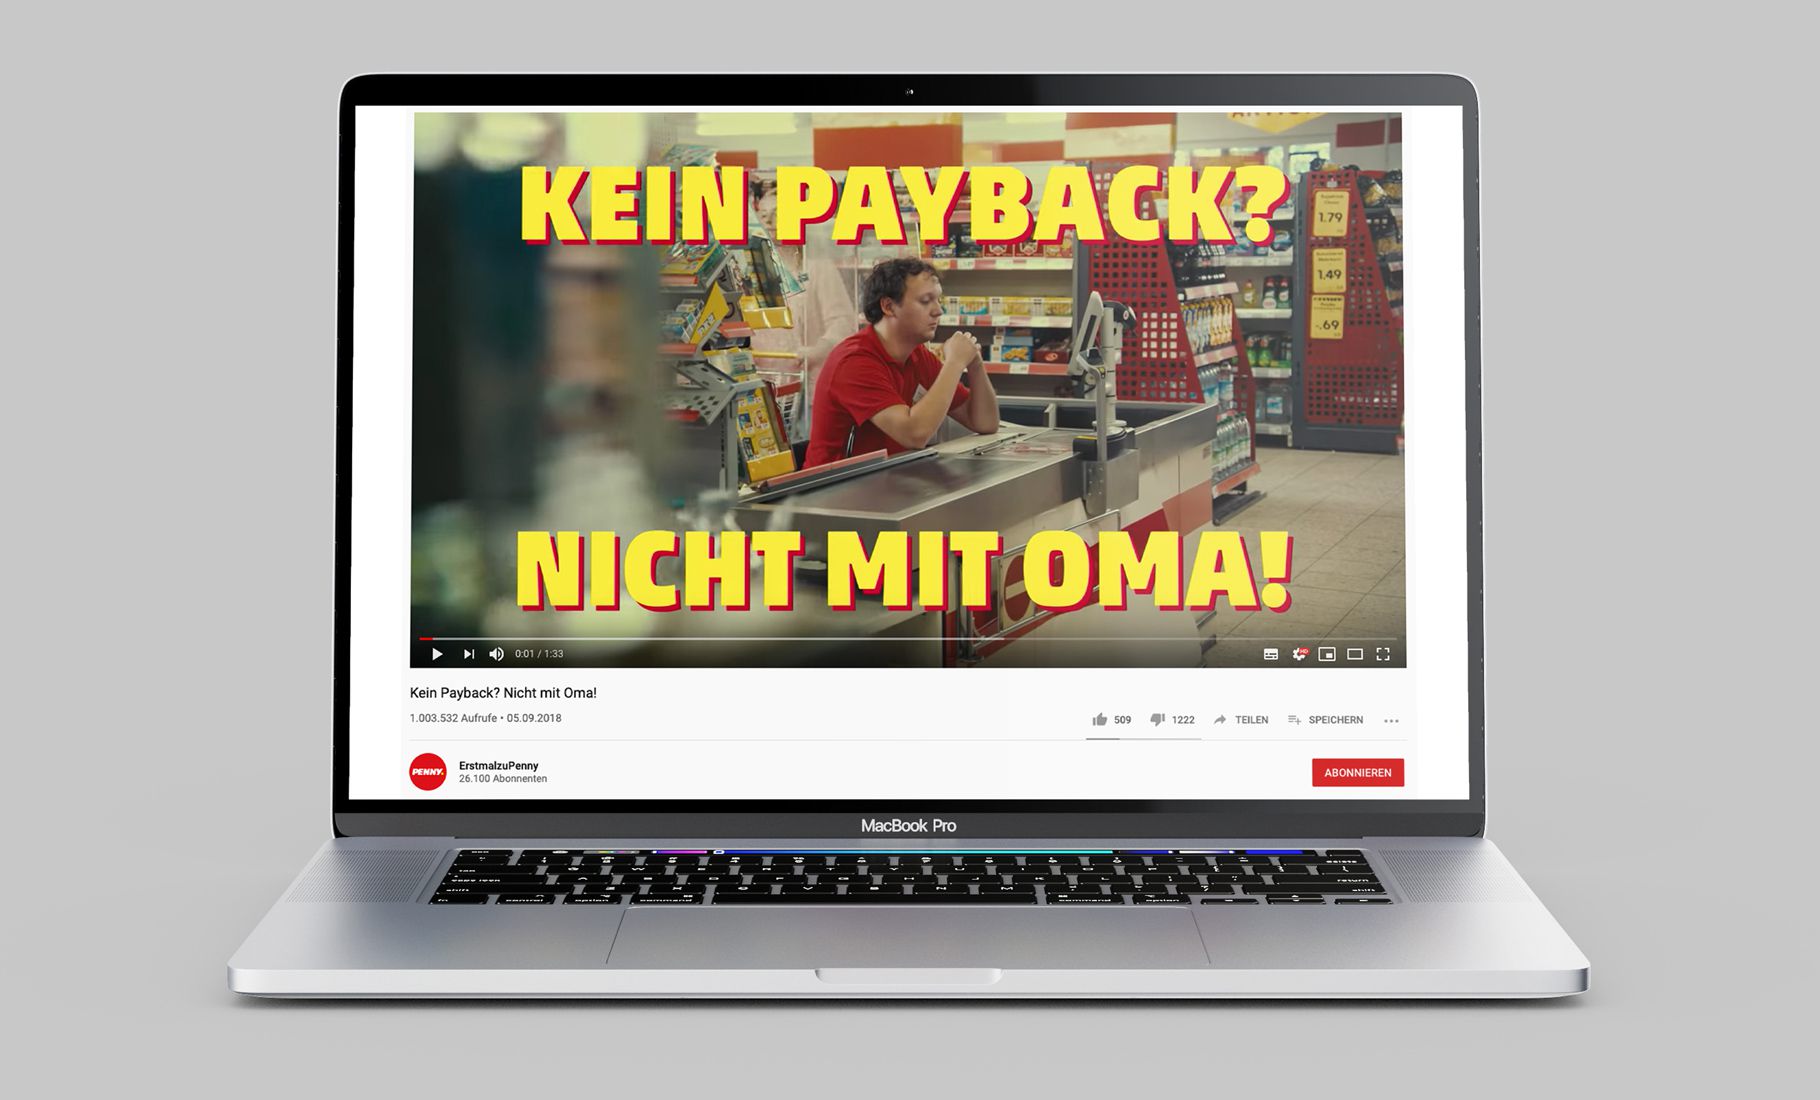 MacBook Pro Mockup of a YouTube Screenshot of "Kein Payback? Nicht mit Oma!"